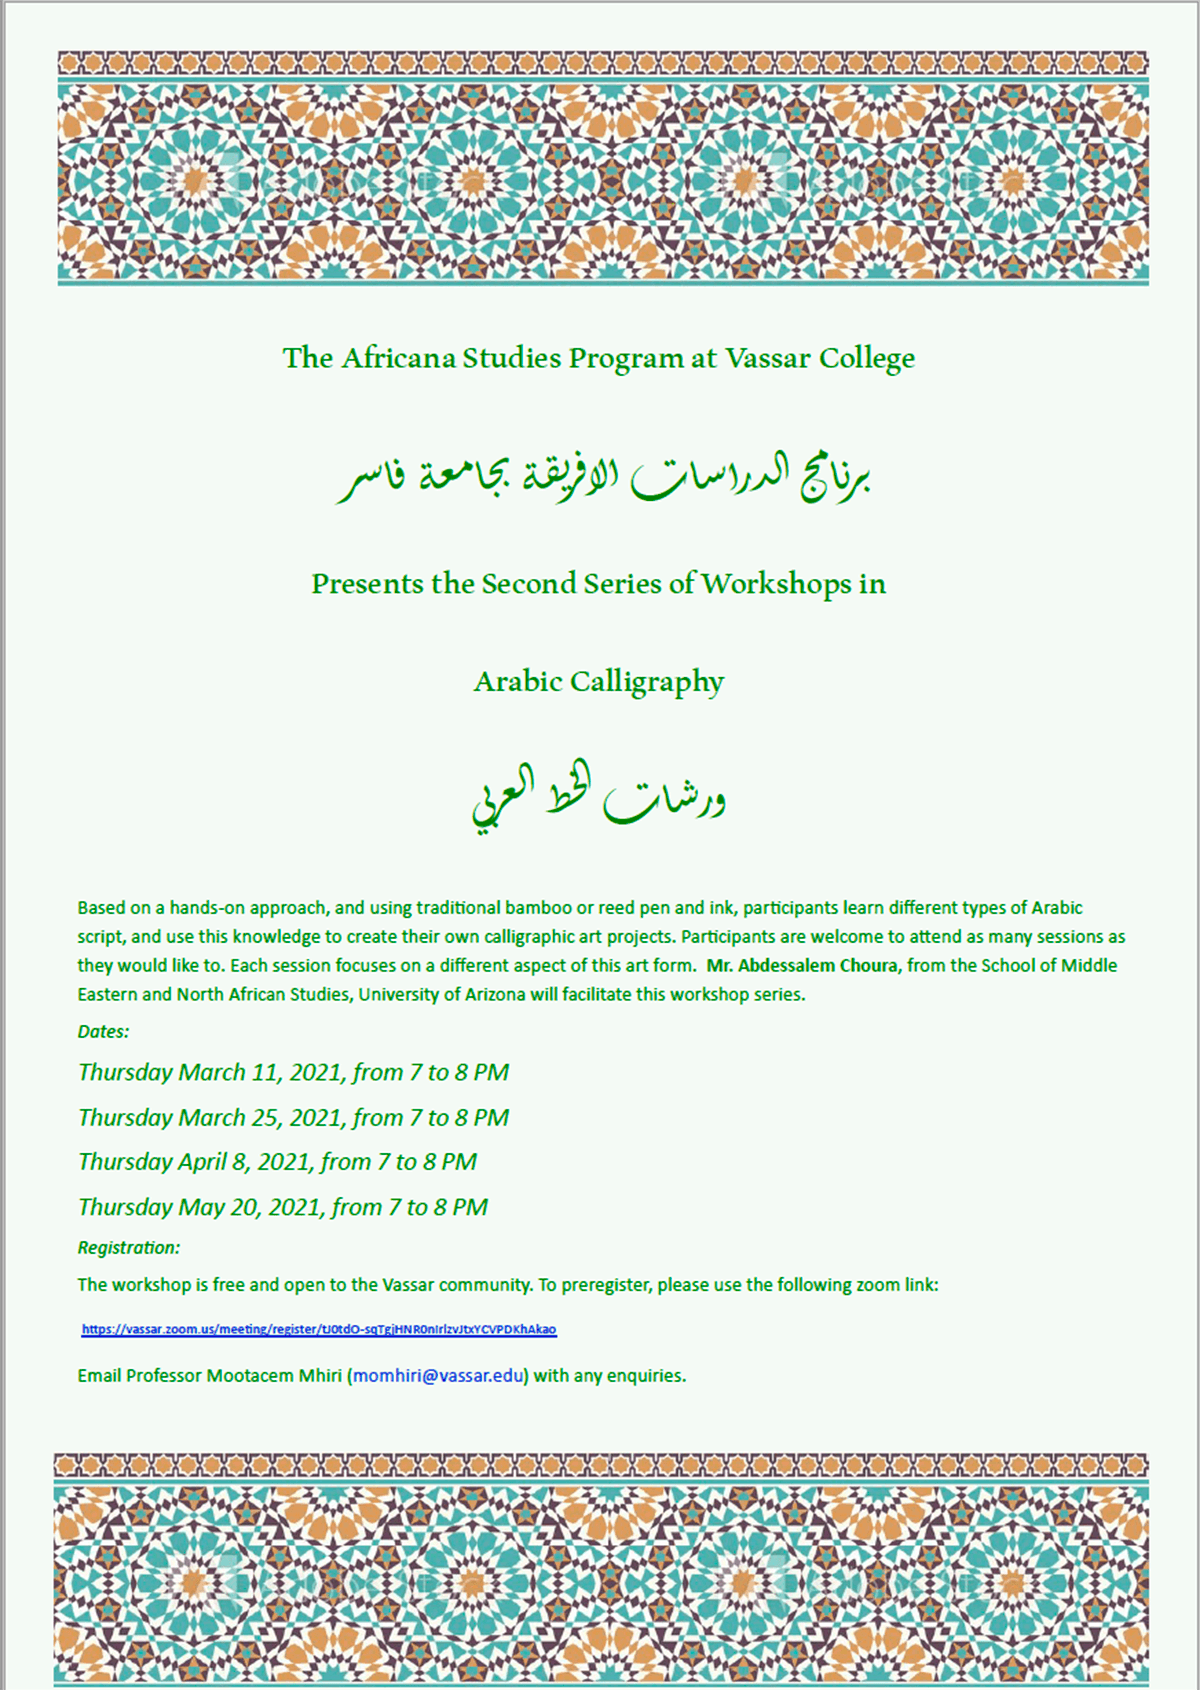 The Africana Studies Program at Vassar College presents the second series of workshops in Arabic Calligraphy. Thursday March 11, March 25, April 8, and May 20, 2021, from 7 to 8 pm.